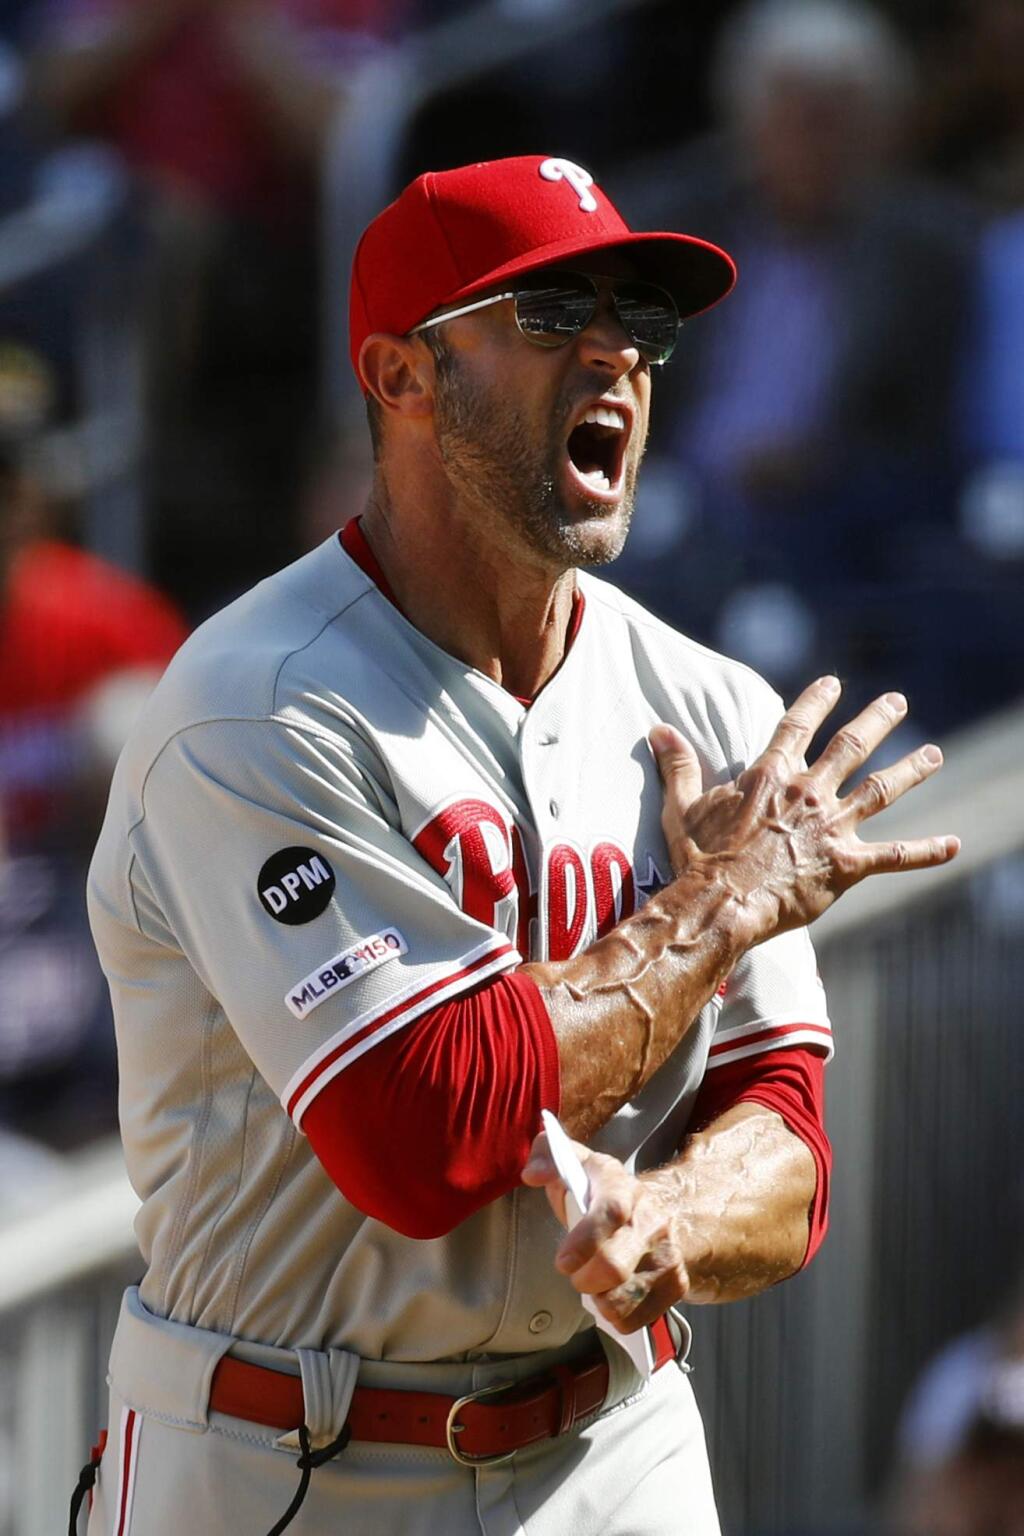 In this Sept. 24, 2019, file photo, Philadelphia Phillies manager Gabe Kapler reacts after Brad Miller was ejected by umpire Alan Porter after striking out looking in the sixth inning of the first baseball game of a doubleheader against the Washington Nationals, in Washington. (AP Photo/Patrick Semansky, File)